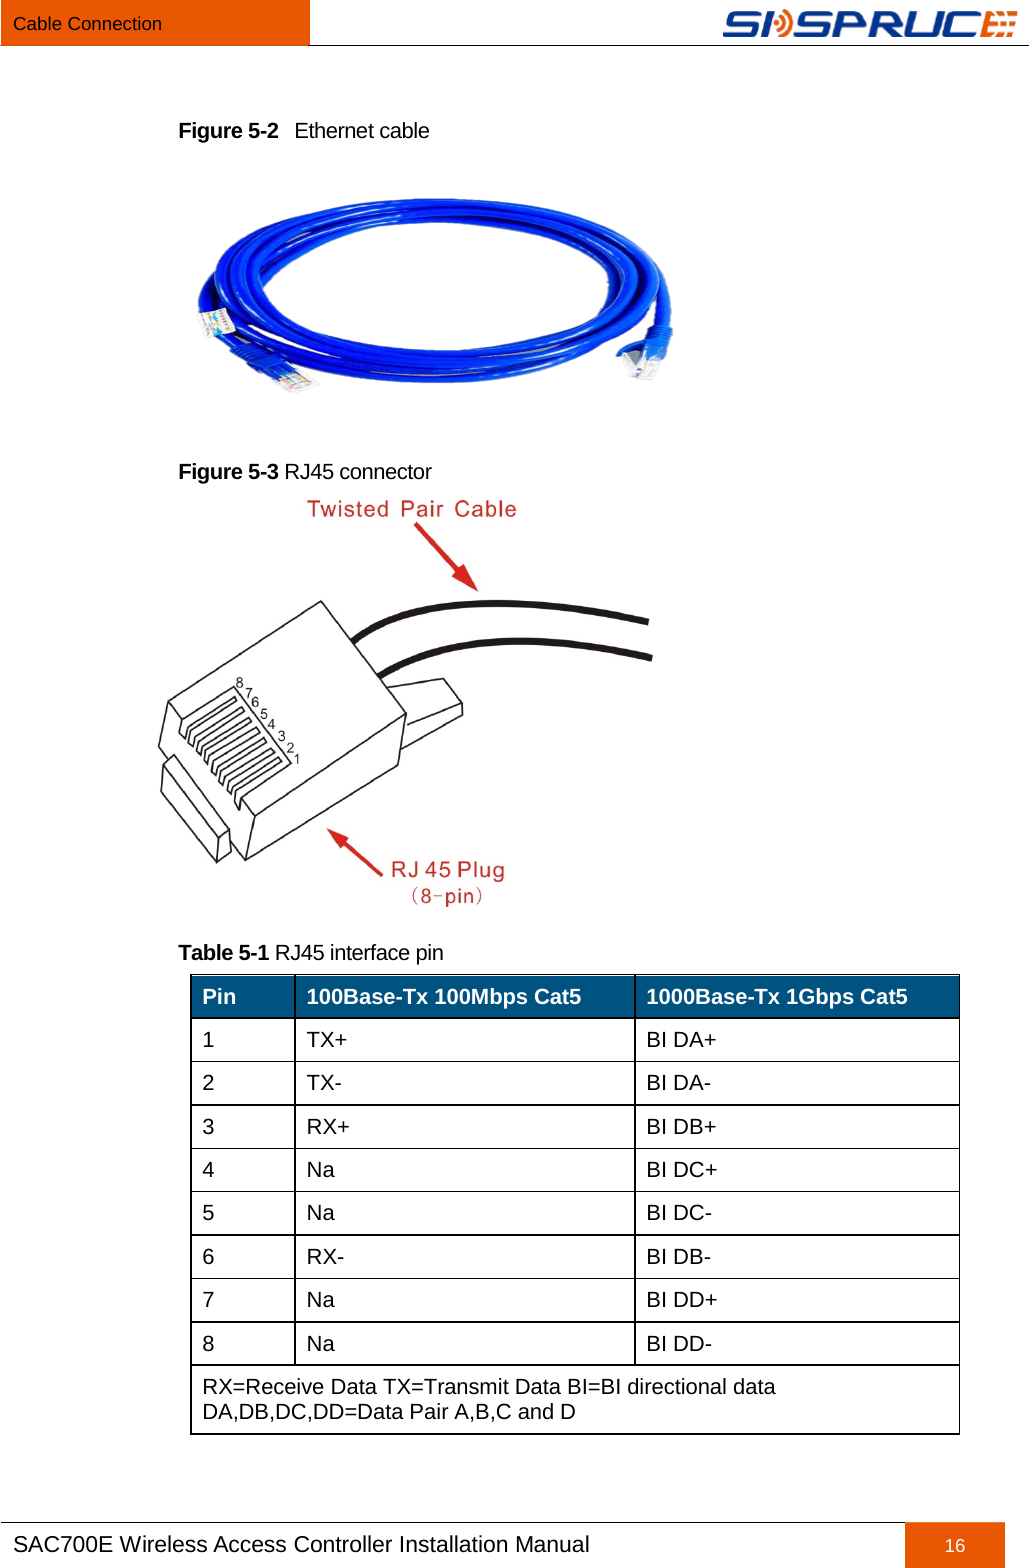 Cable Connection   SAC700E Wireless Access Controller Installation Manual 16  Figure 5-2  Ethernet cable  Figure 5-3 RJ45 connector  Table 5-1 RJ45 interface pin Pin 100Base-Tx 100Mbps Cat5 1000Base-Tx 1Gbps Cat5 1  TX+ BI DA+ 2  TX-  BI DA- 3  RX+ BI DB+ 4  Na BI DC+ 5  Na BI DC- 6  RX-  BI DB- 7  Na BI DD+ 8  Na BI DD- RX=Receive Data TX=Transmit Data BI=BI directional data DA,DB,DC,DD=Data Pair A,B,C and D    